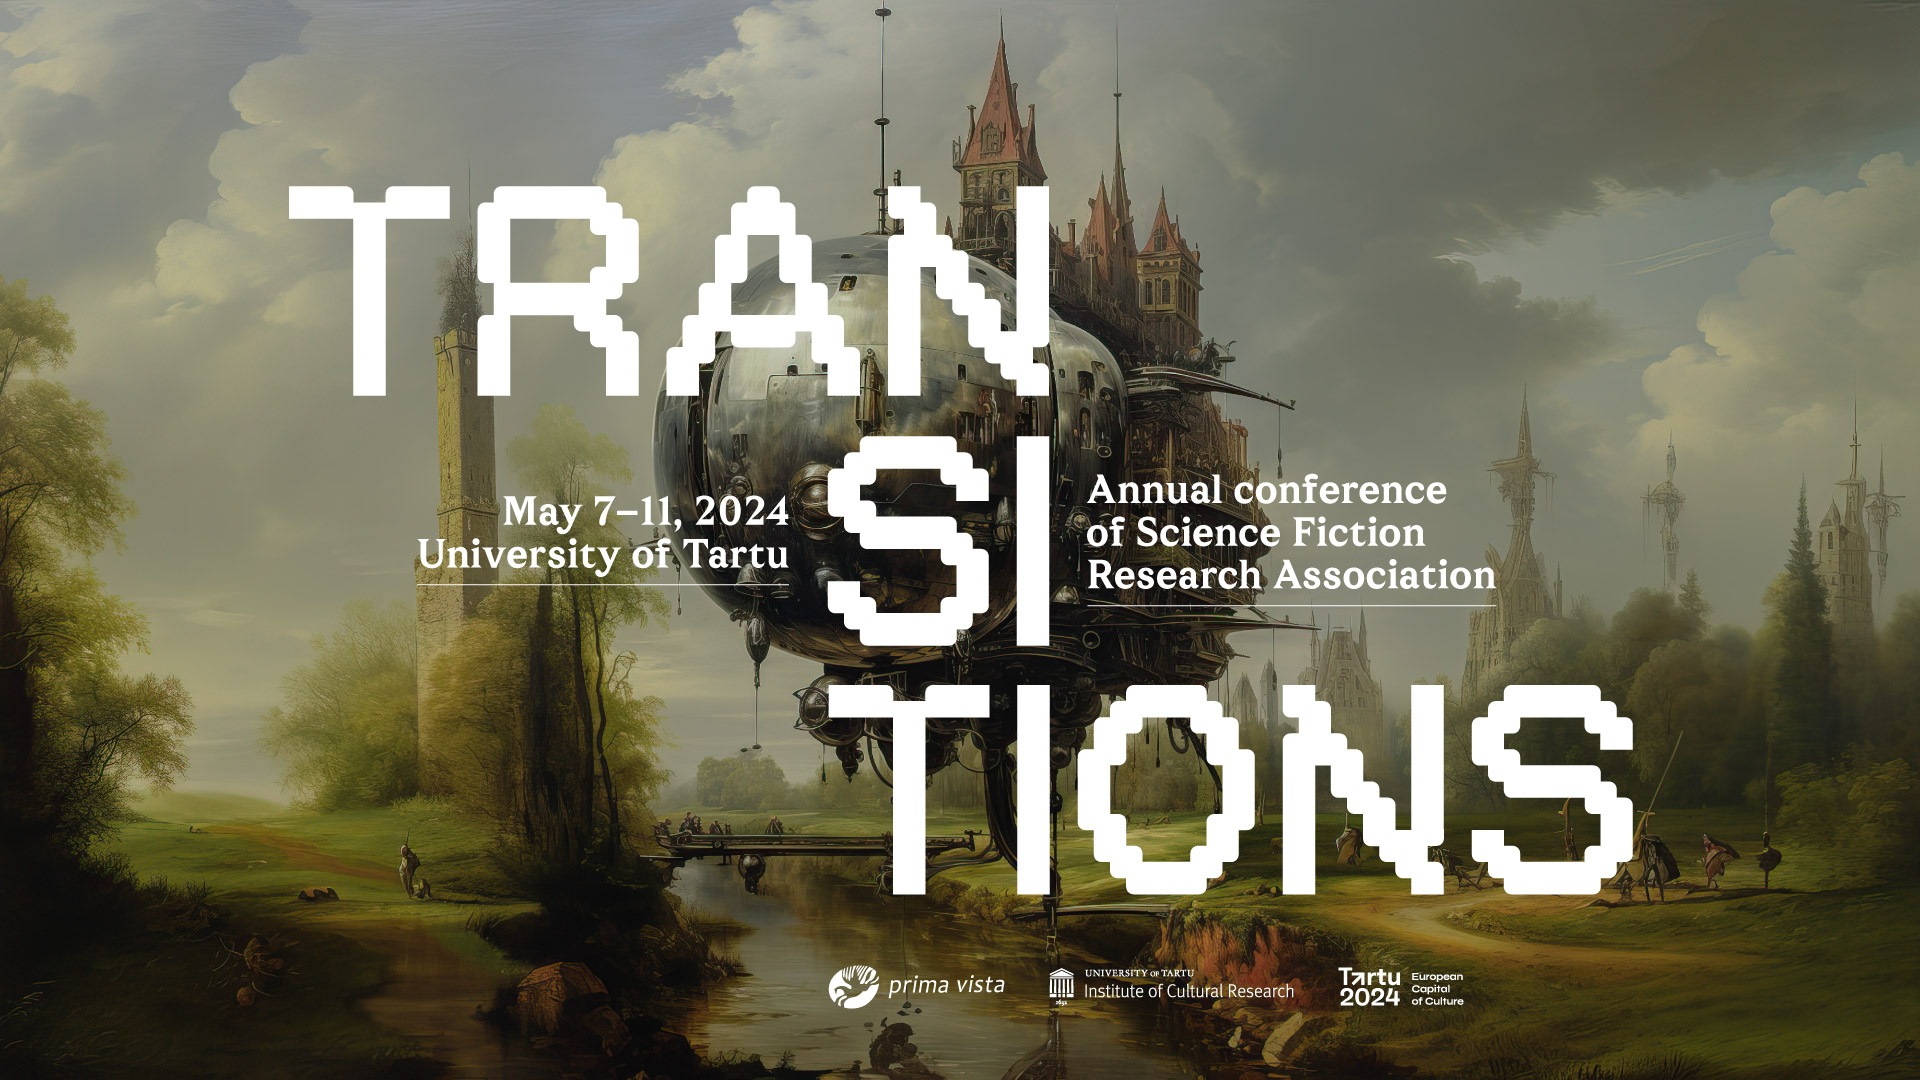 CALL FOR PAPERS: Transitions. Annual conference of Science Fiction Research Association, 2024